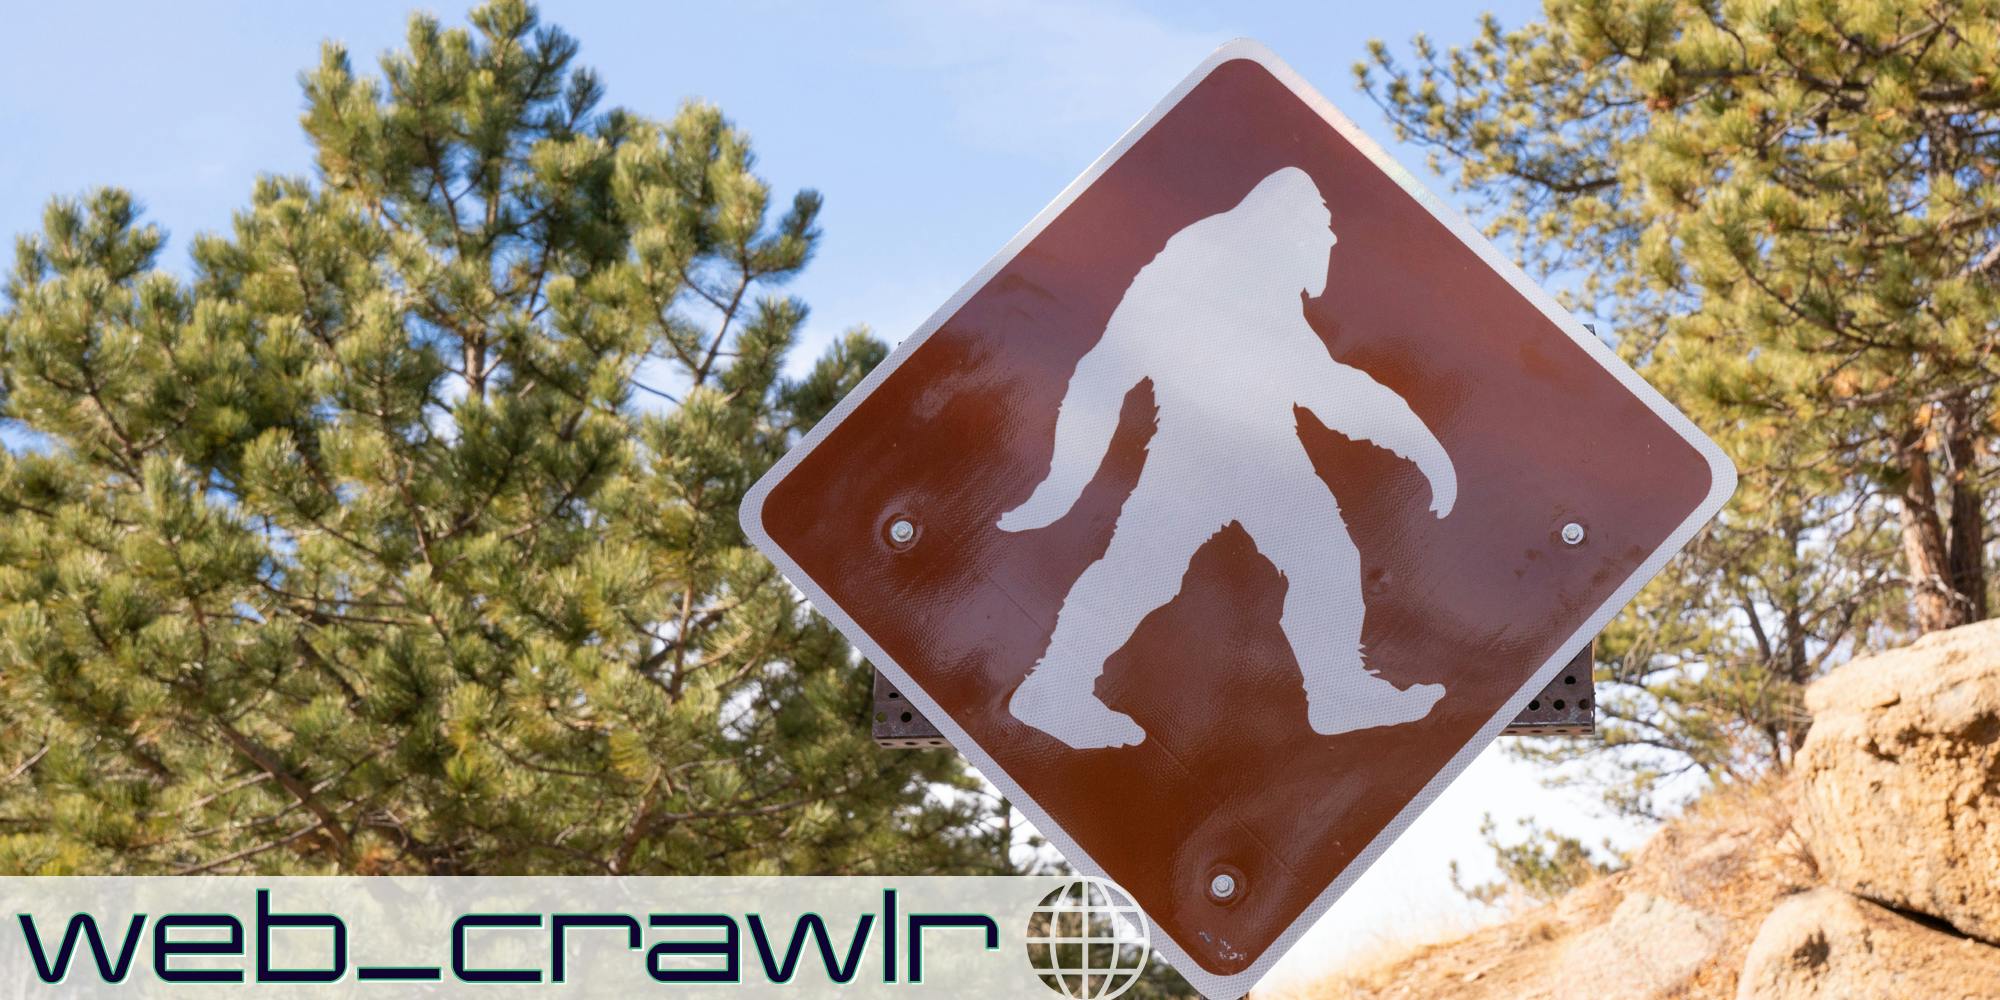 A Bigfoot crossing sign. The Daily Dot newsletter web_crawlr logo is in the bottom left corner.